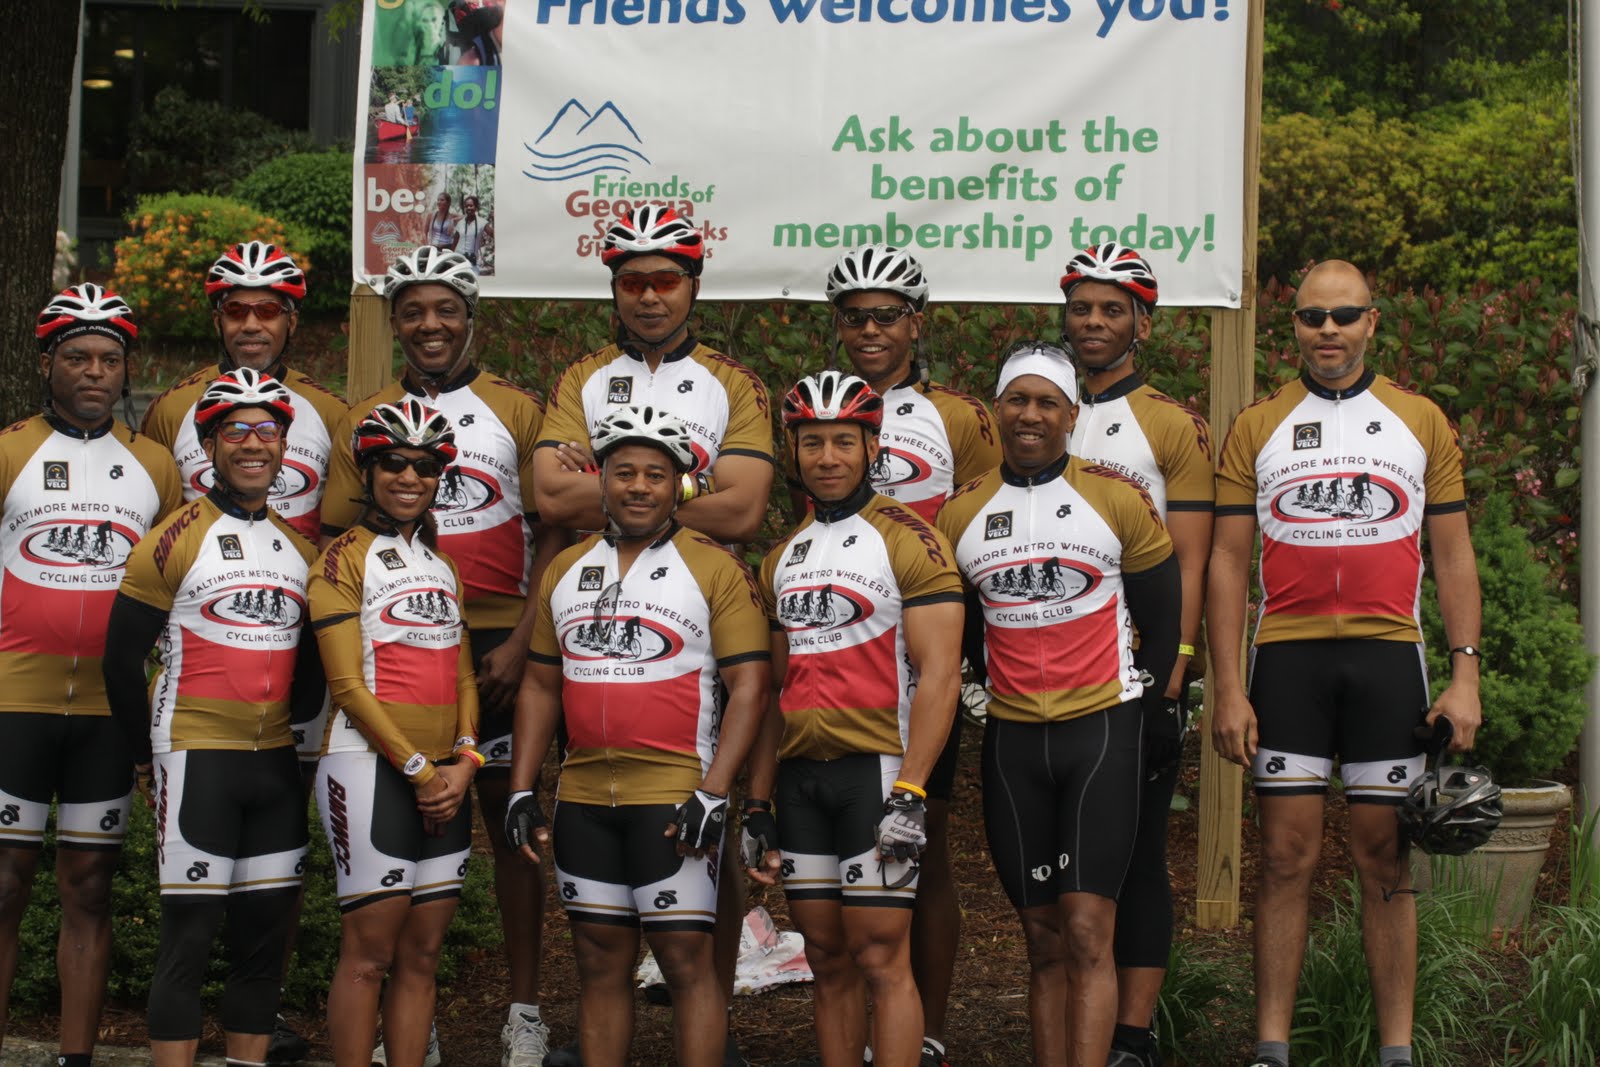 Bmwcc pertaining to cycling club benefits intended for Found Home